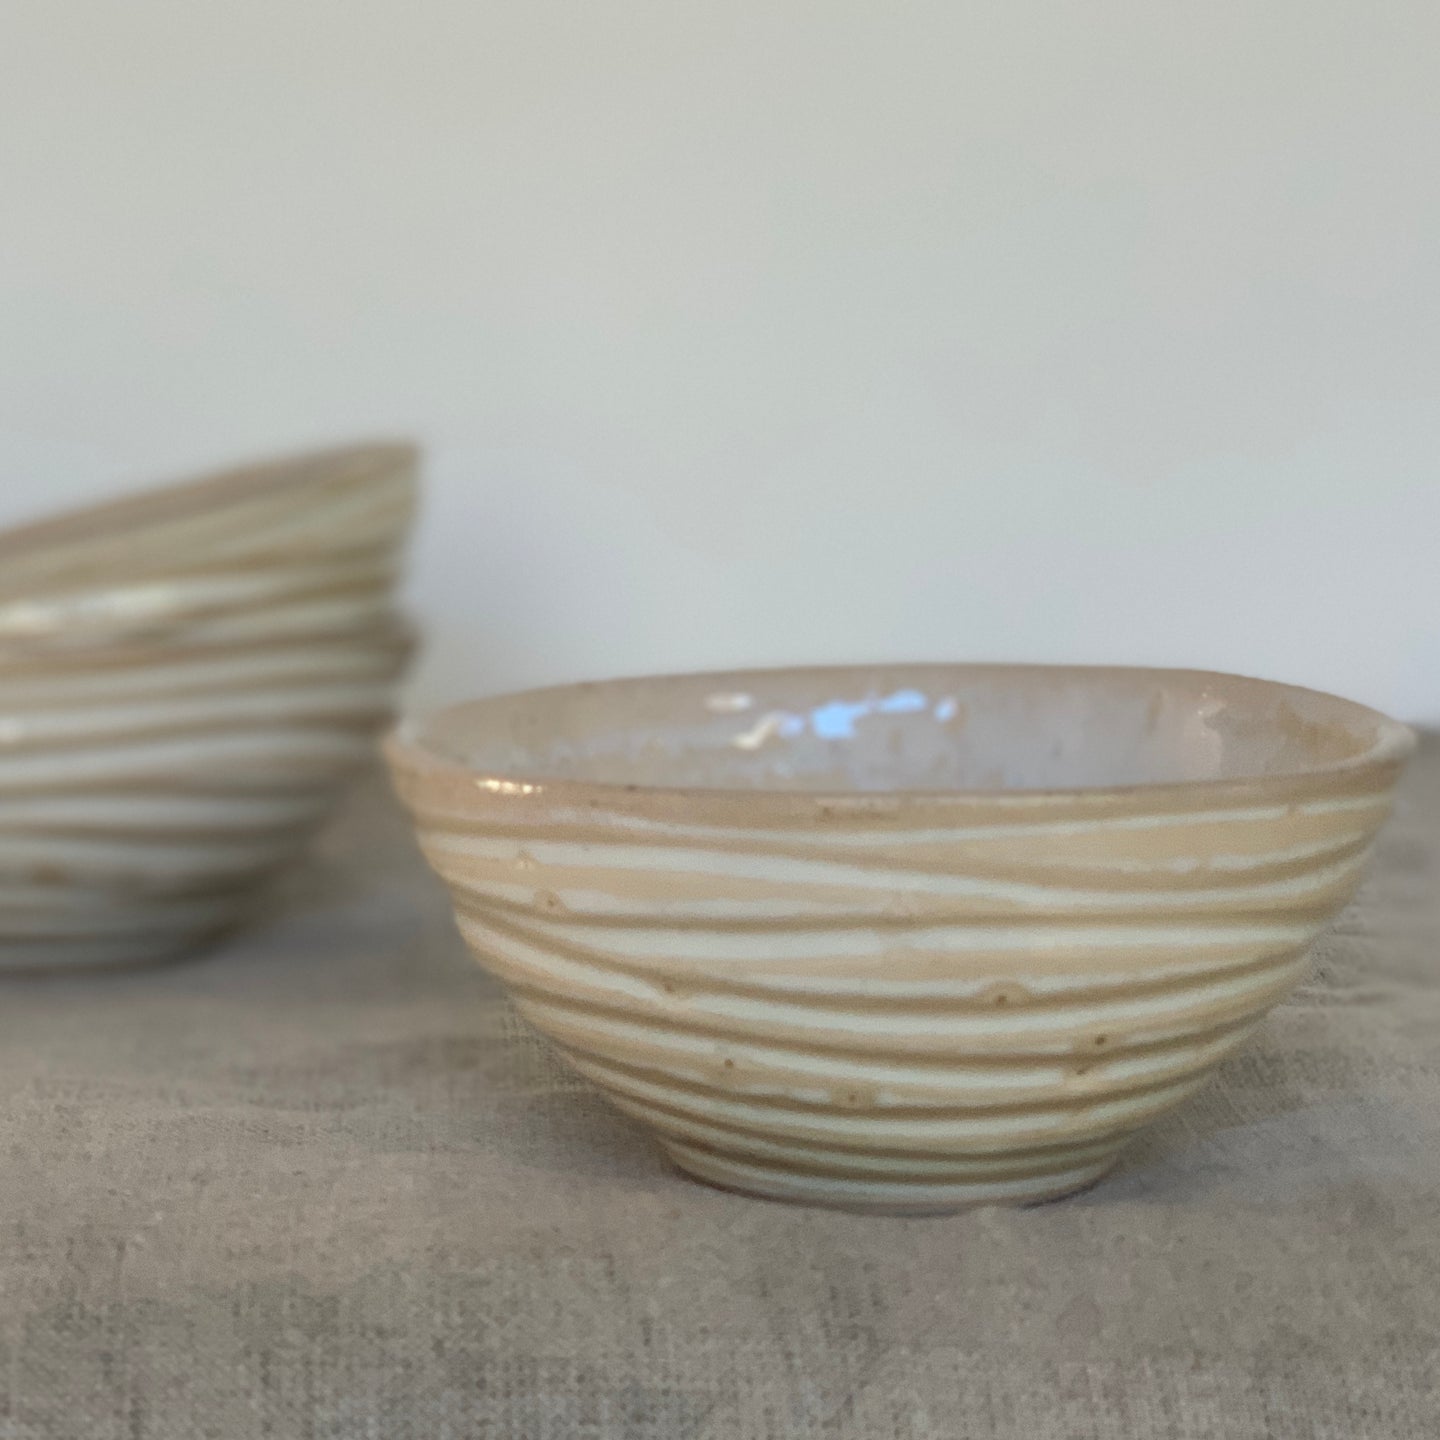 OATMEAL SMALL EVERYDAY BOWLS IN WAVE